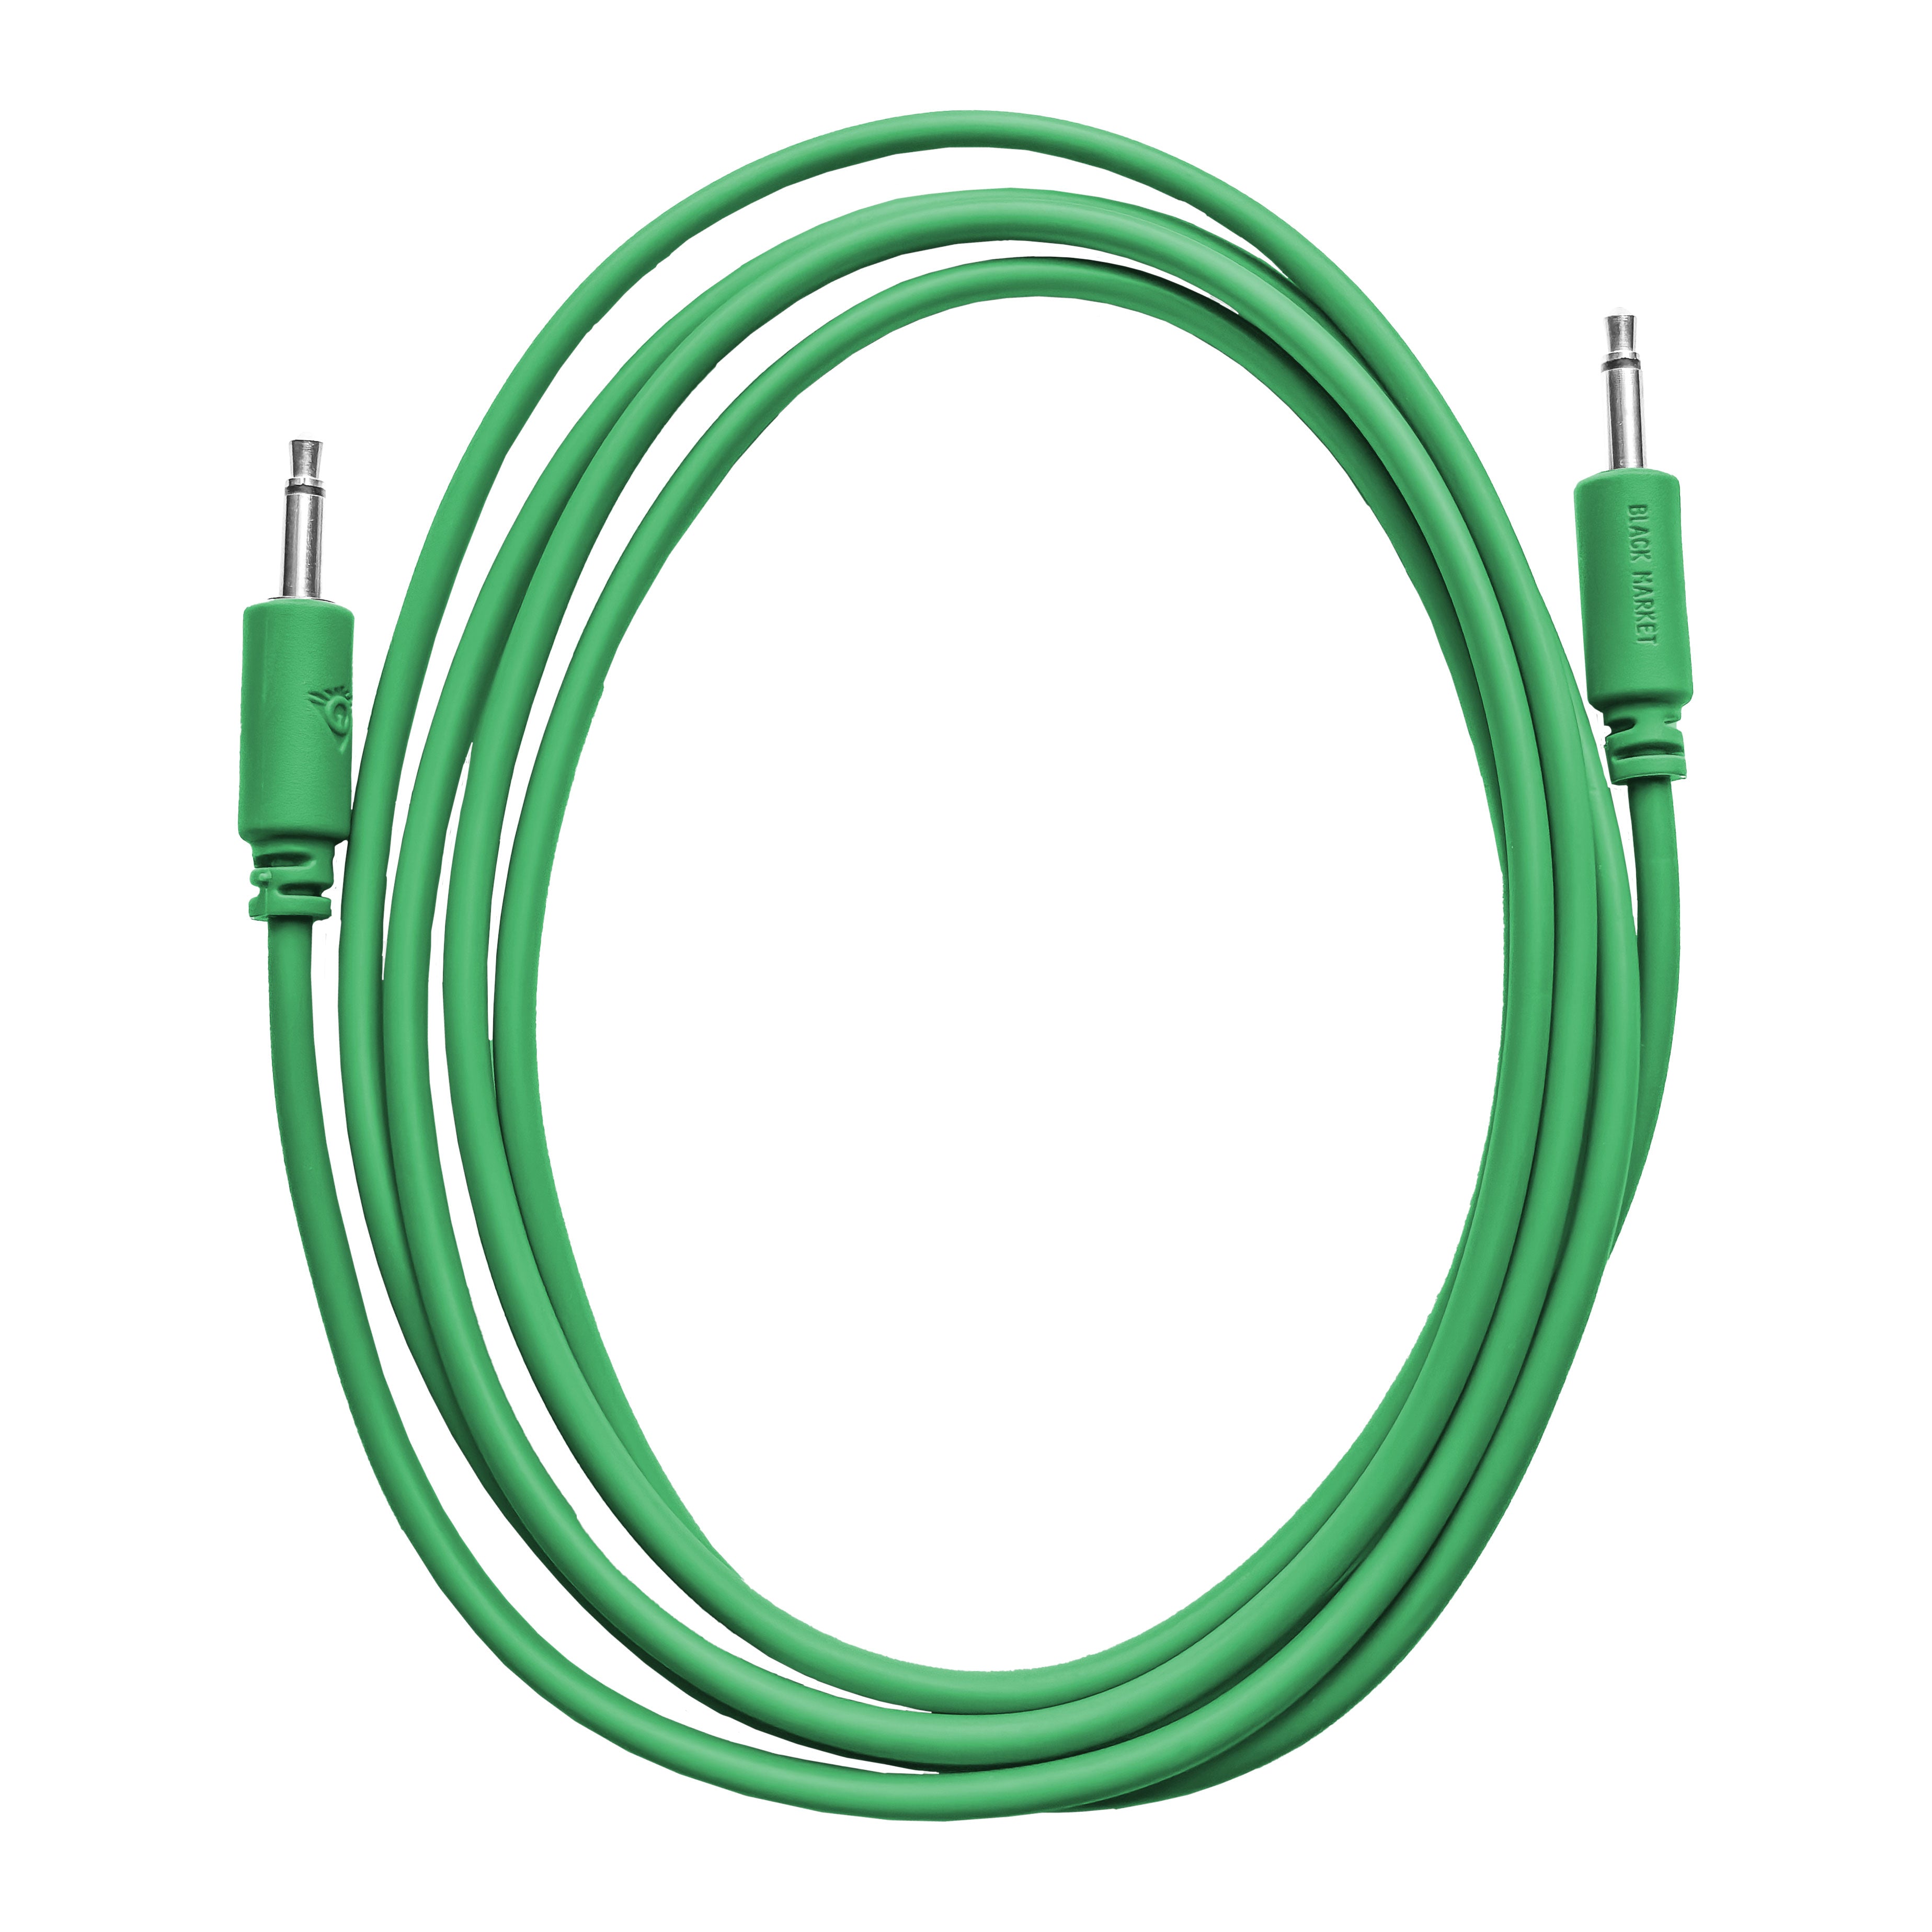 Black Market Modular 3.5mm Patch Cable - 100cm/40" - Green View 1